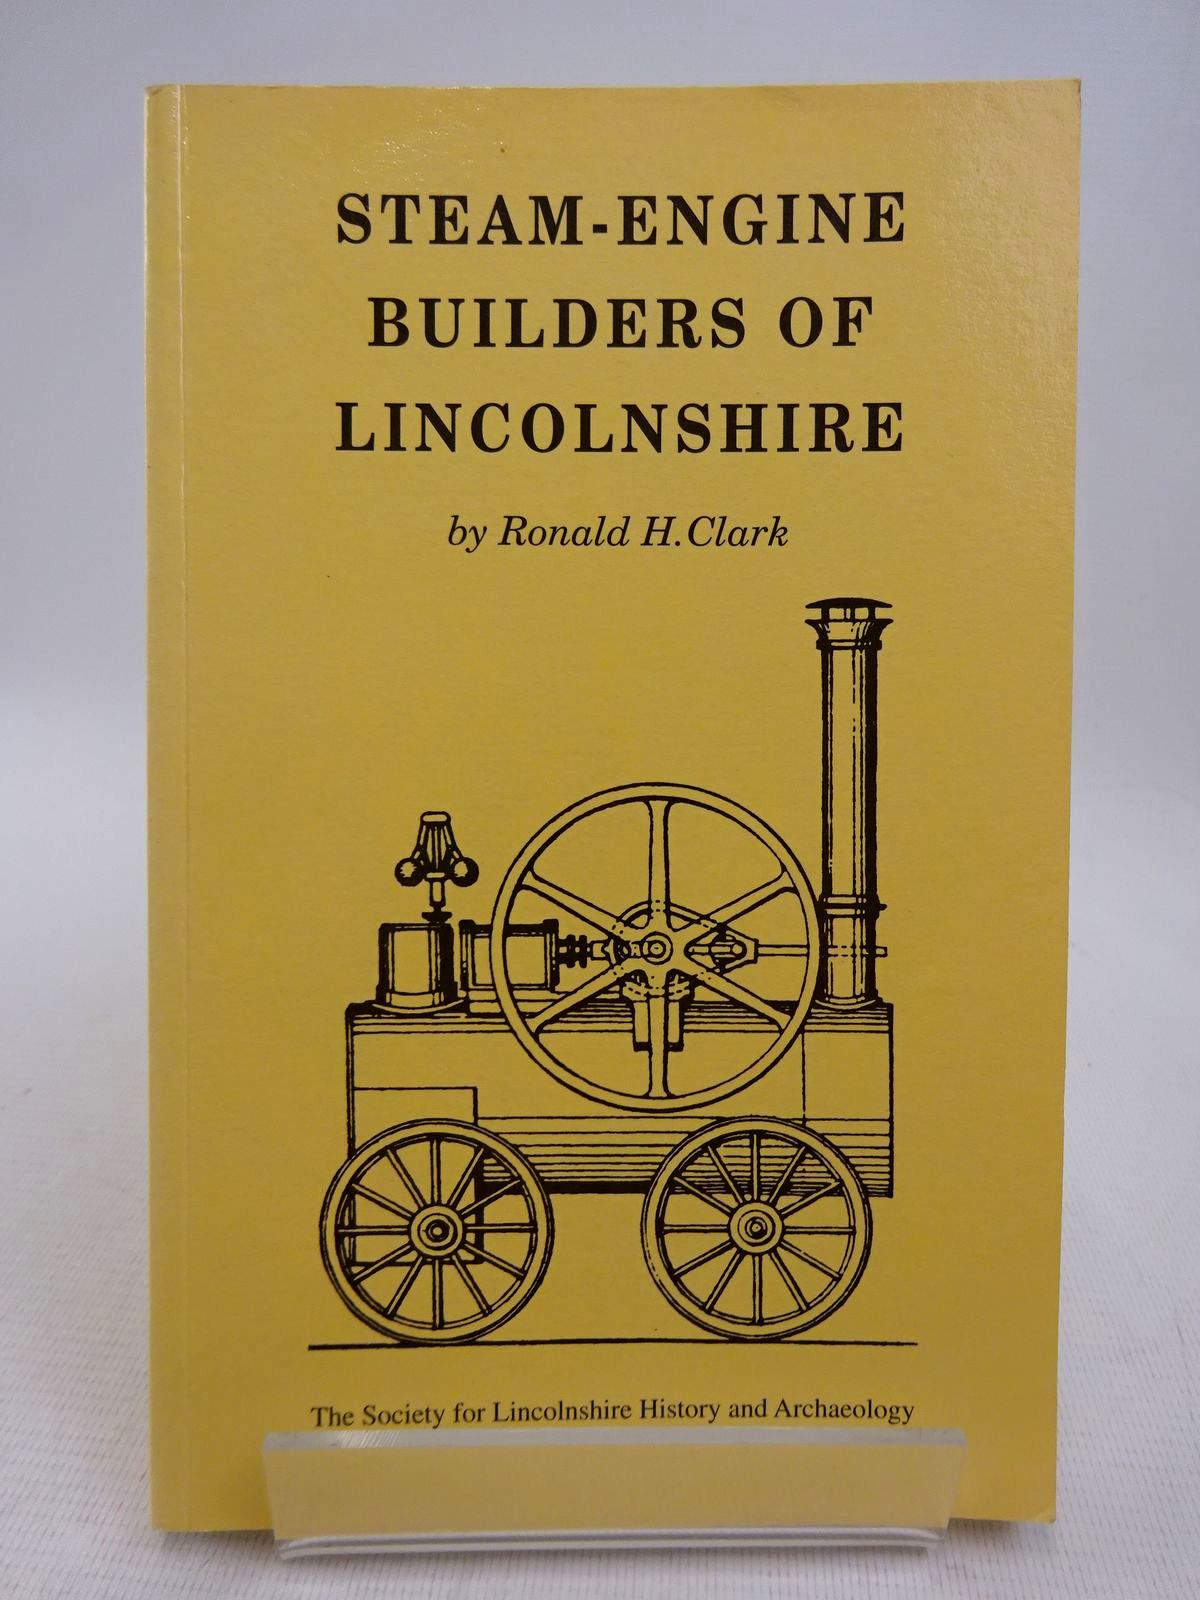 Steam-engine Builders Of Lincolnshire